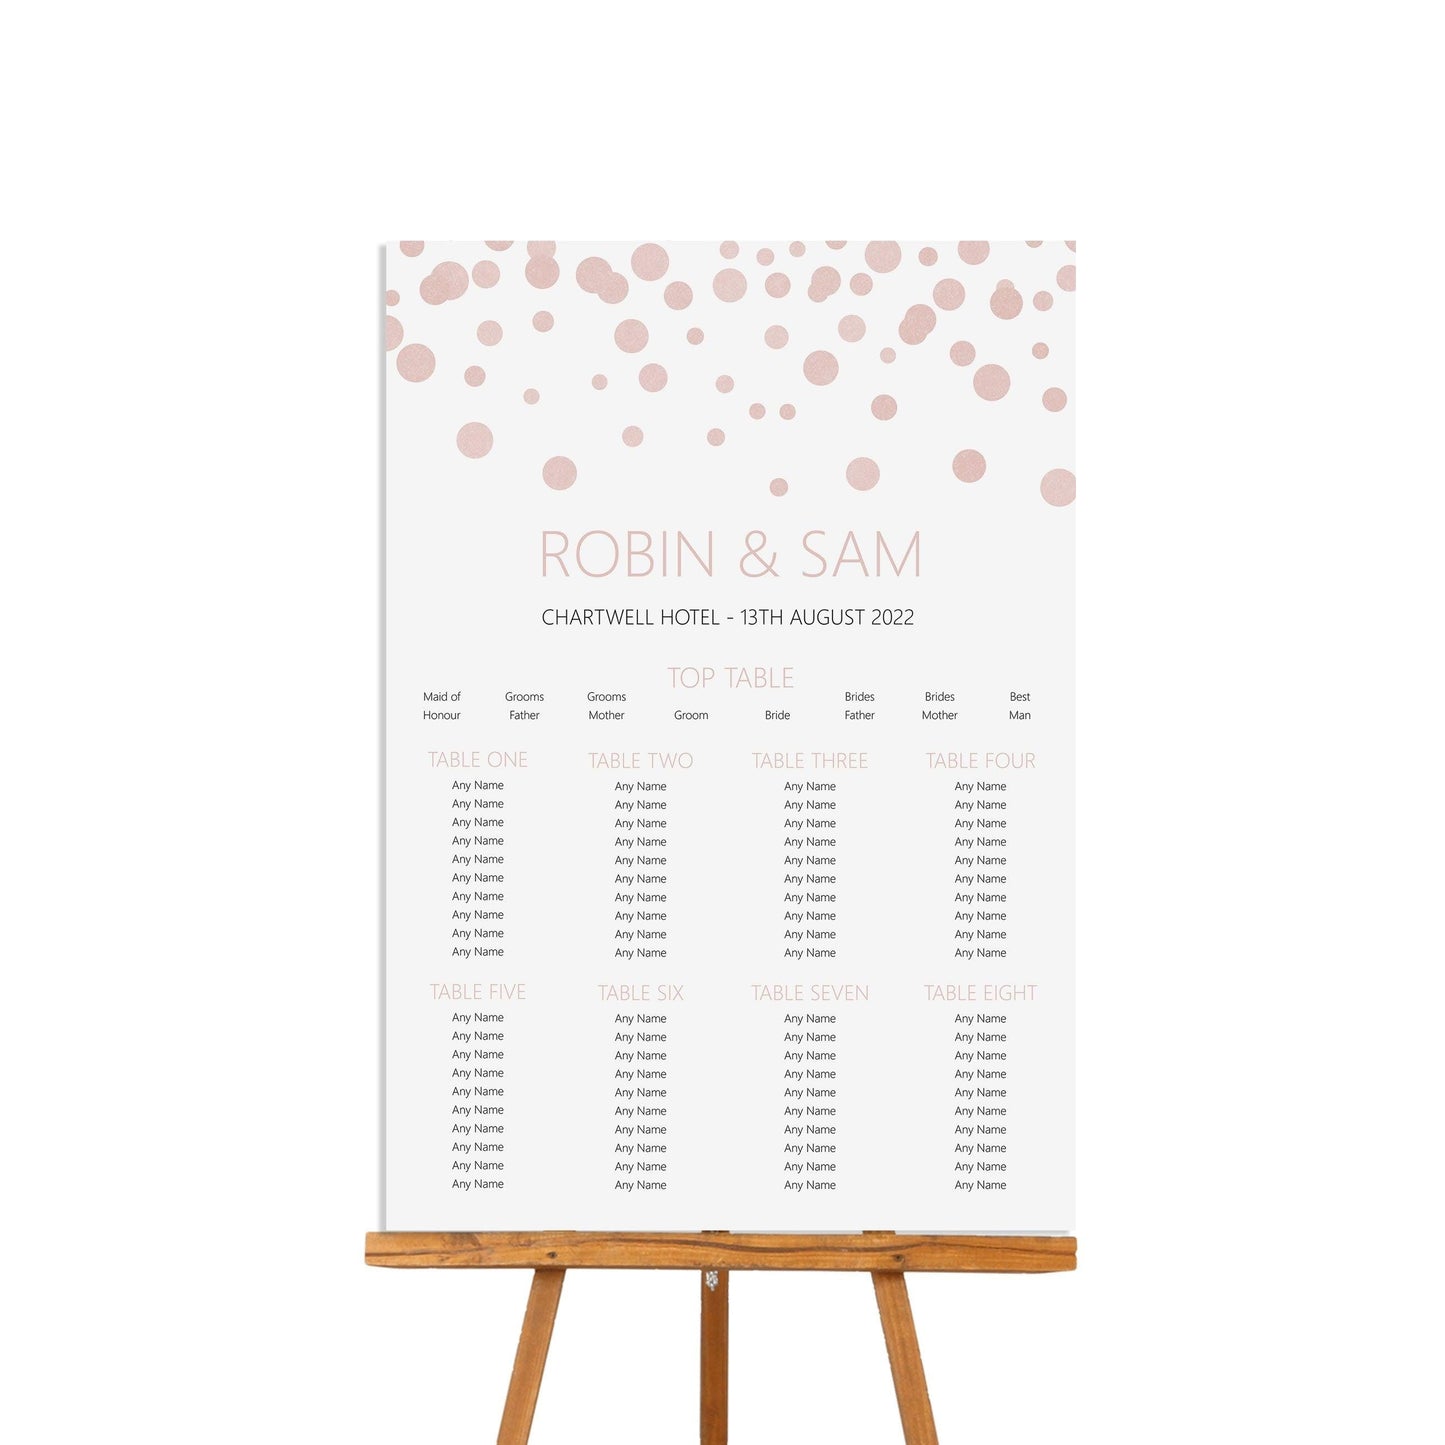  Blush Confetti Wedding Table Plan Seating Chart - A2 Or A1 by PMPRINTED 